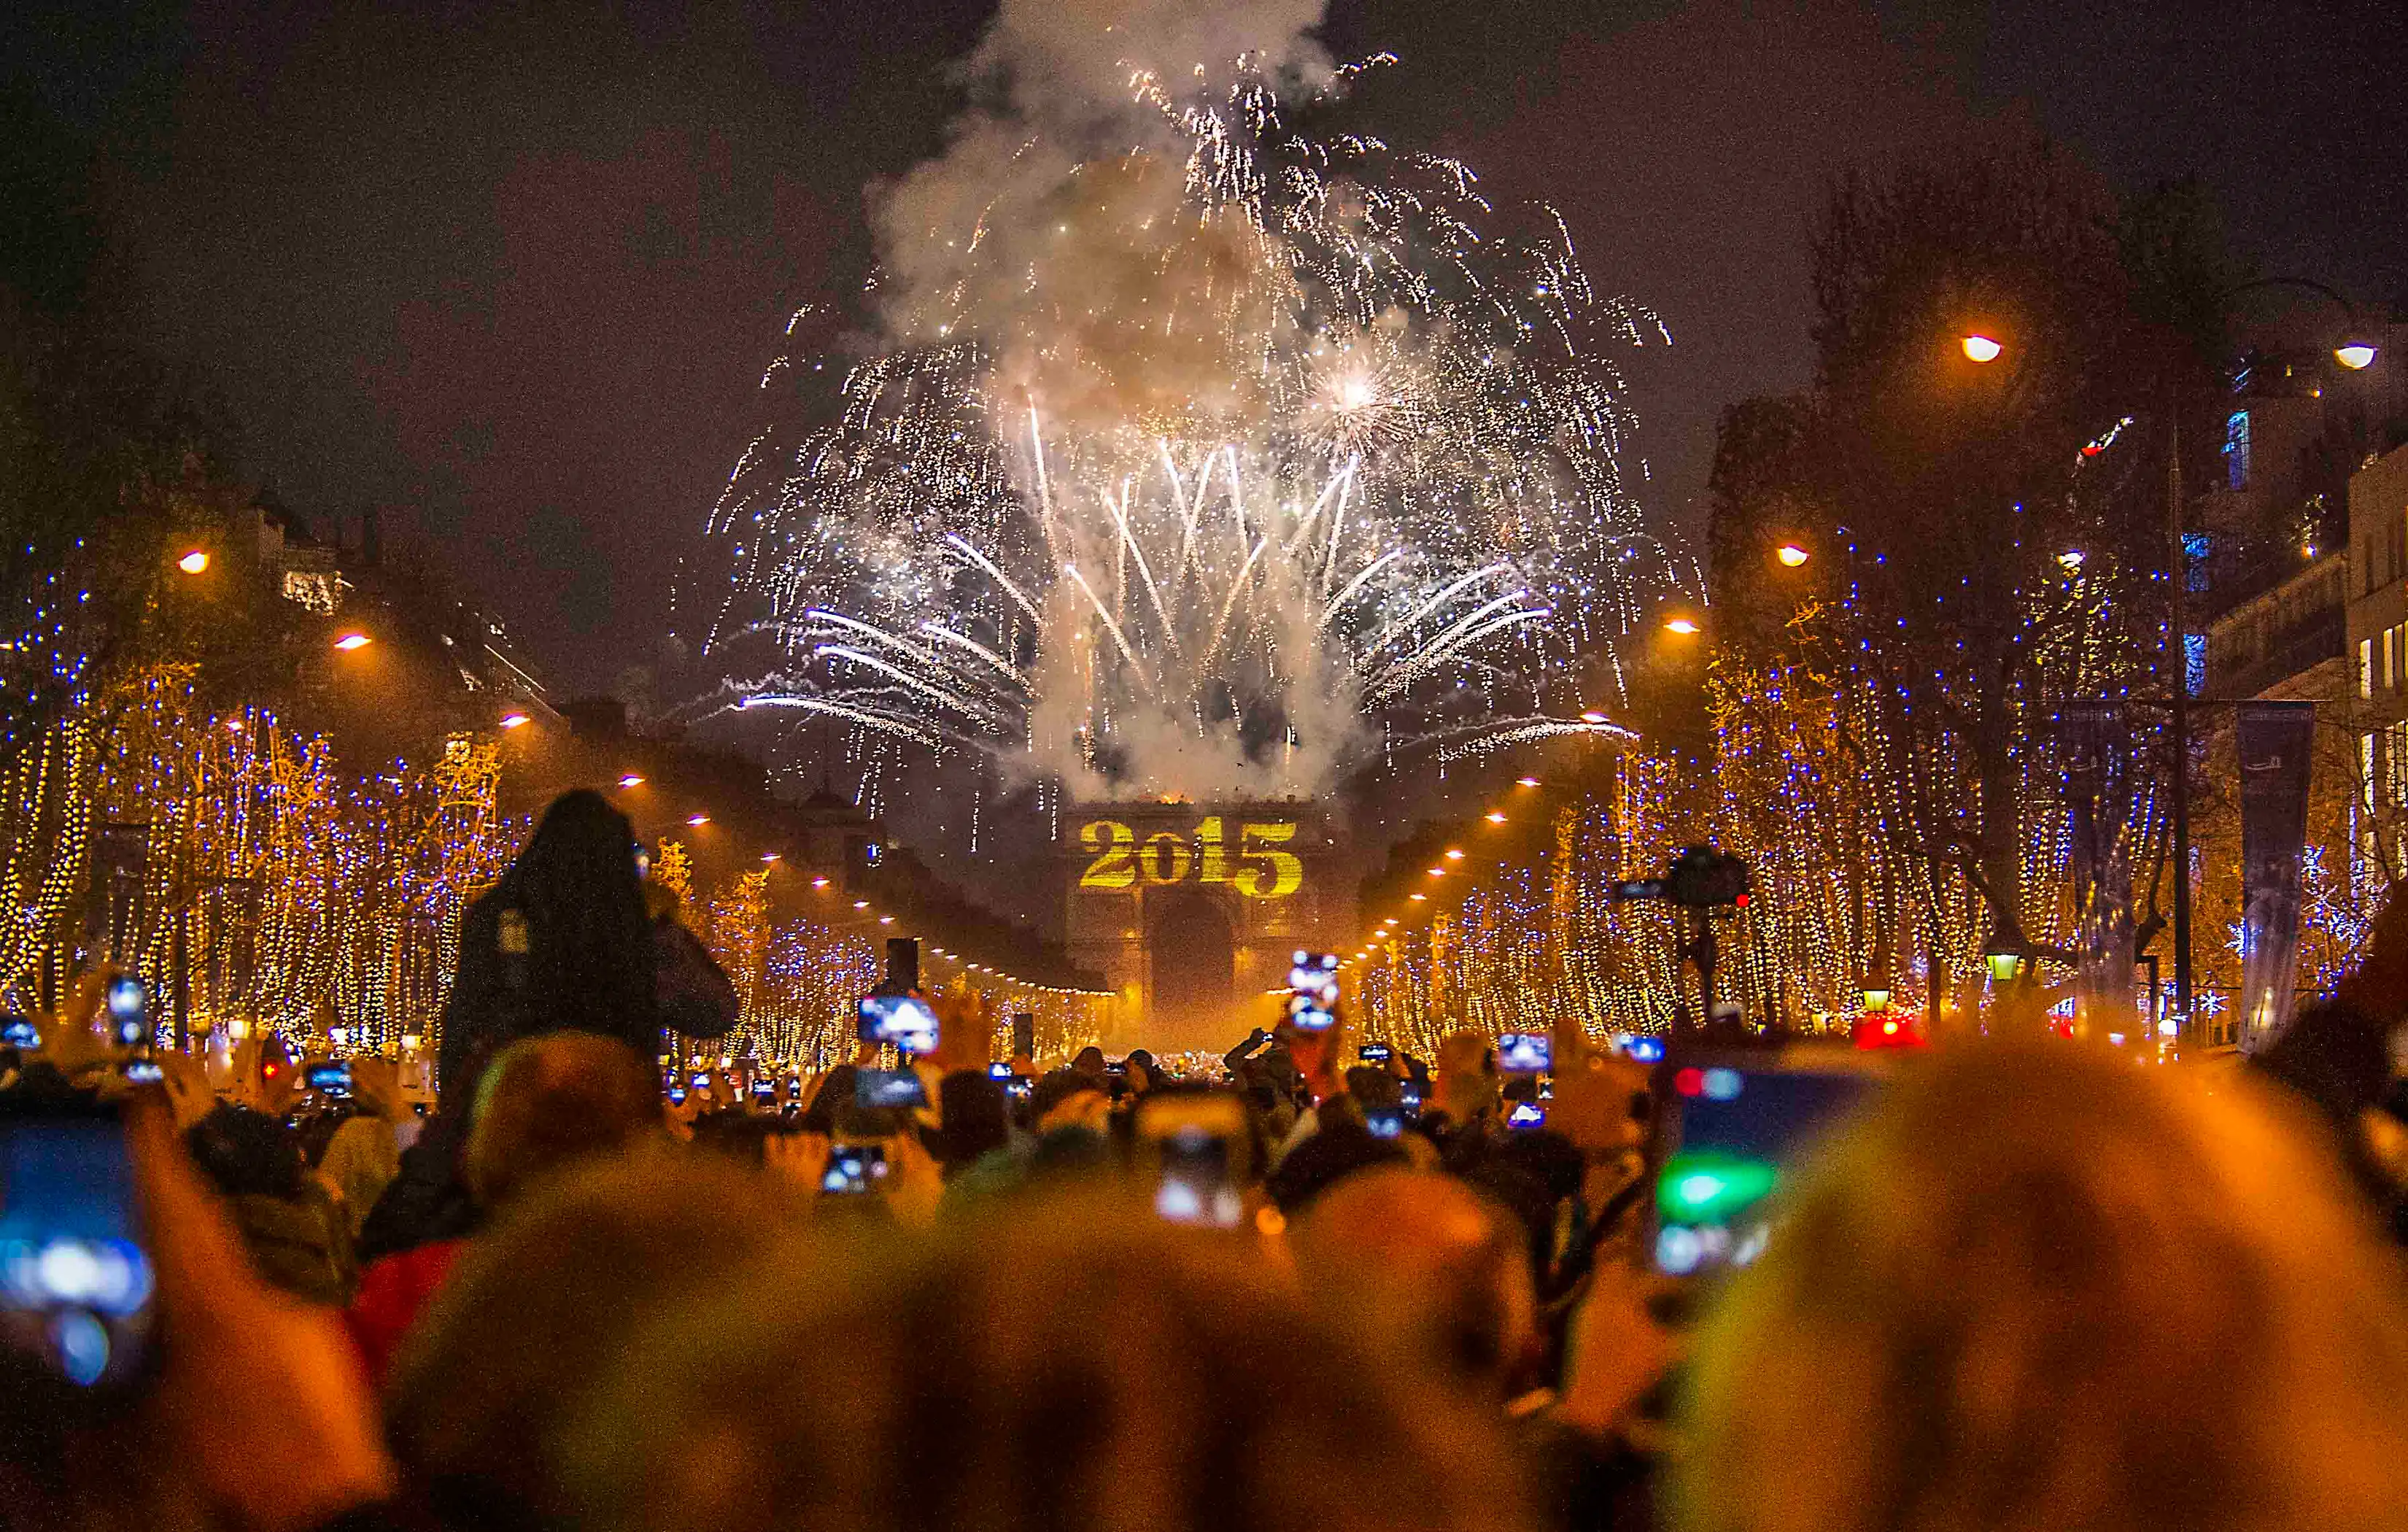 Paris on New Year's Eve